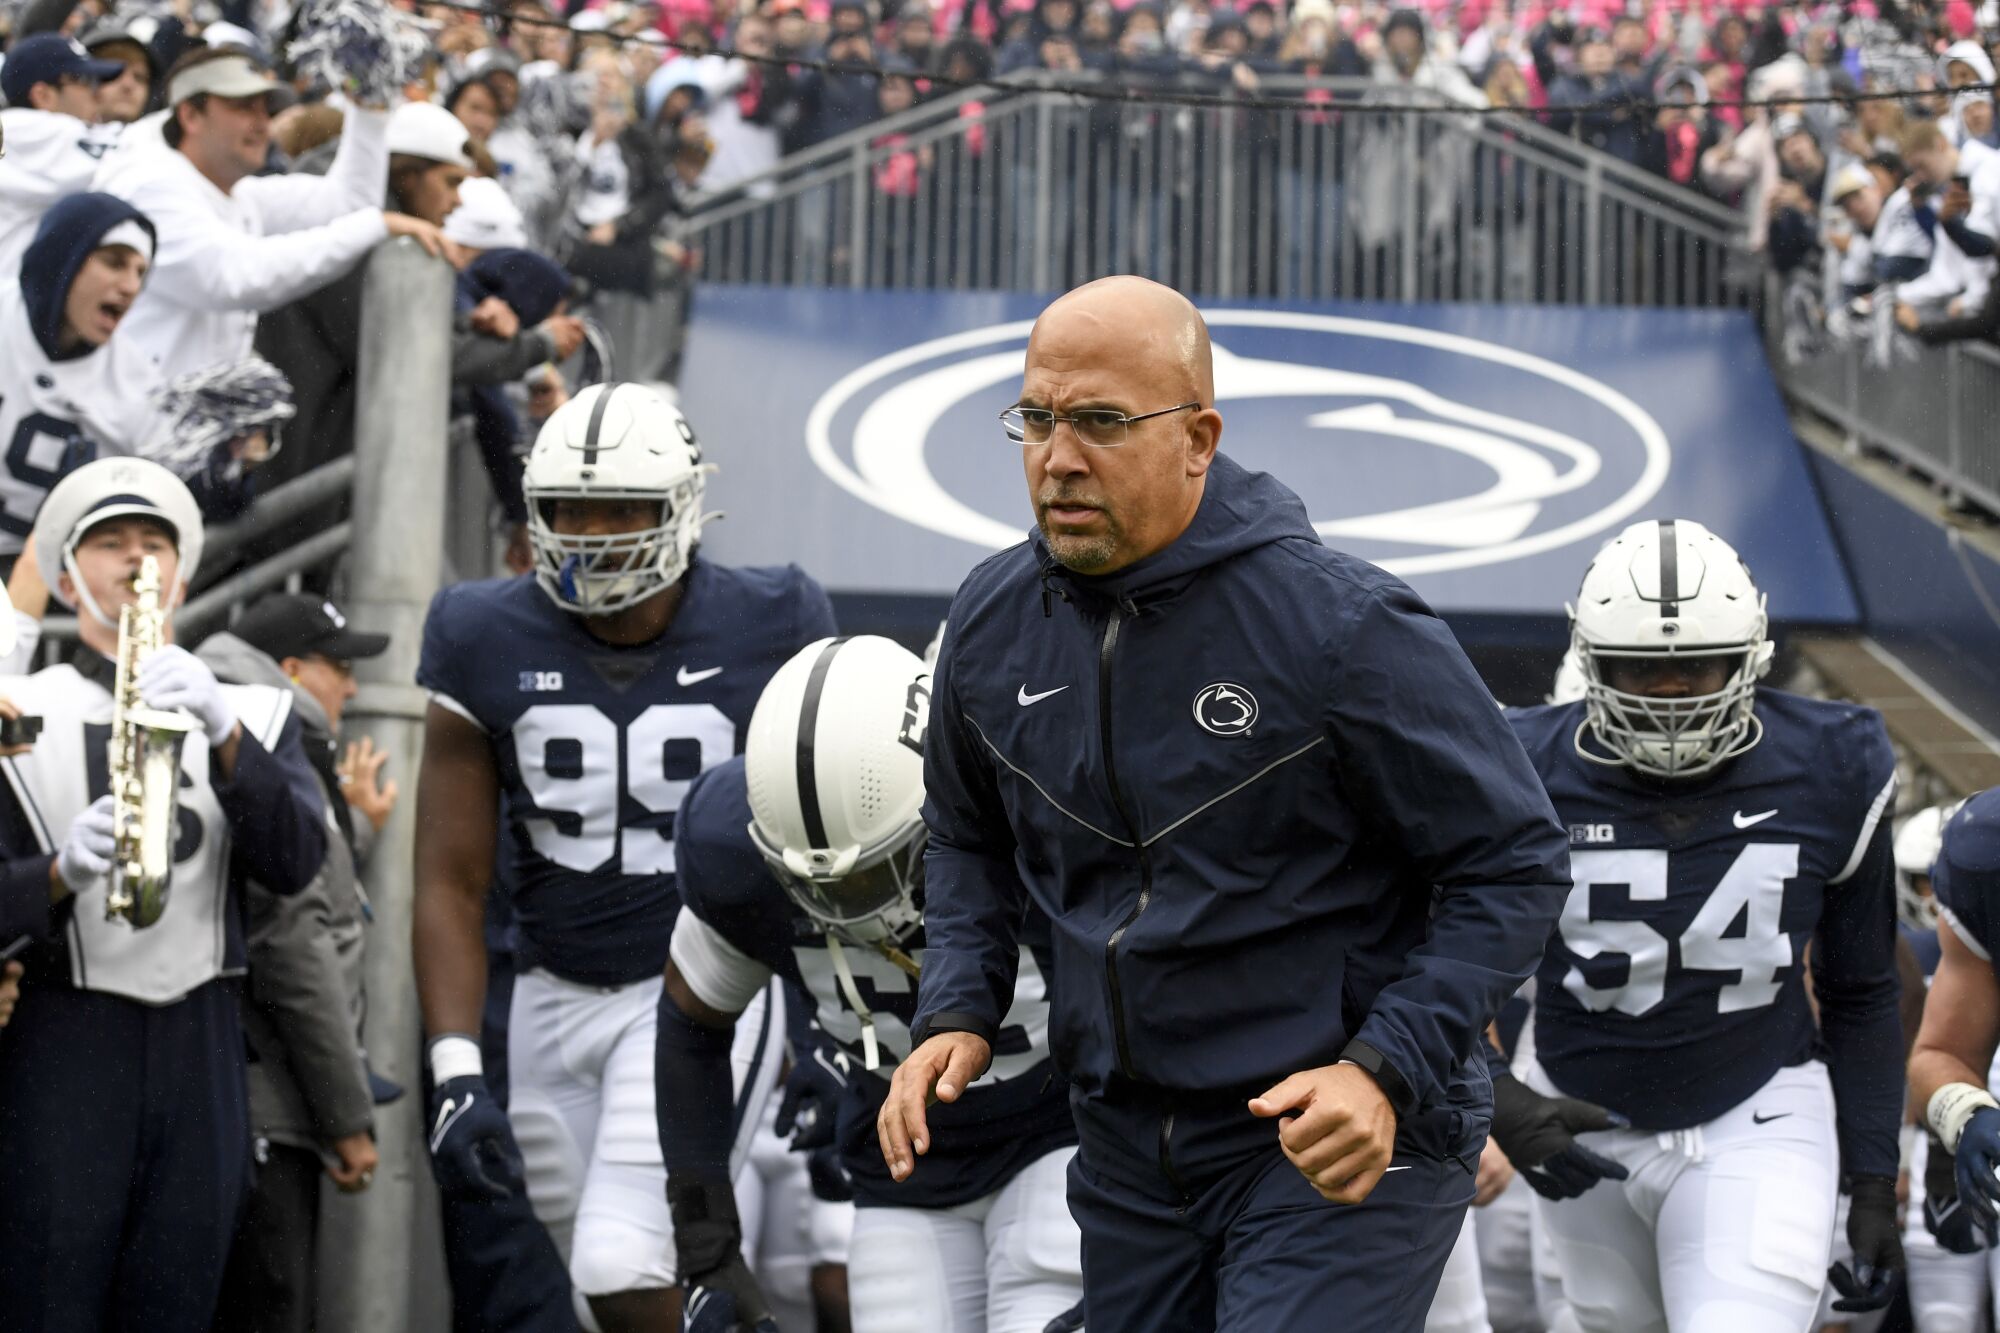 Penn State coach James Franklin leads his team onto the field against Illinois Saturday